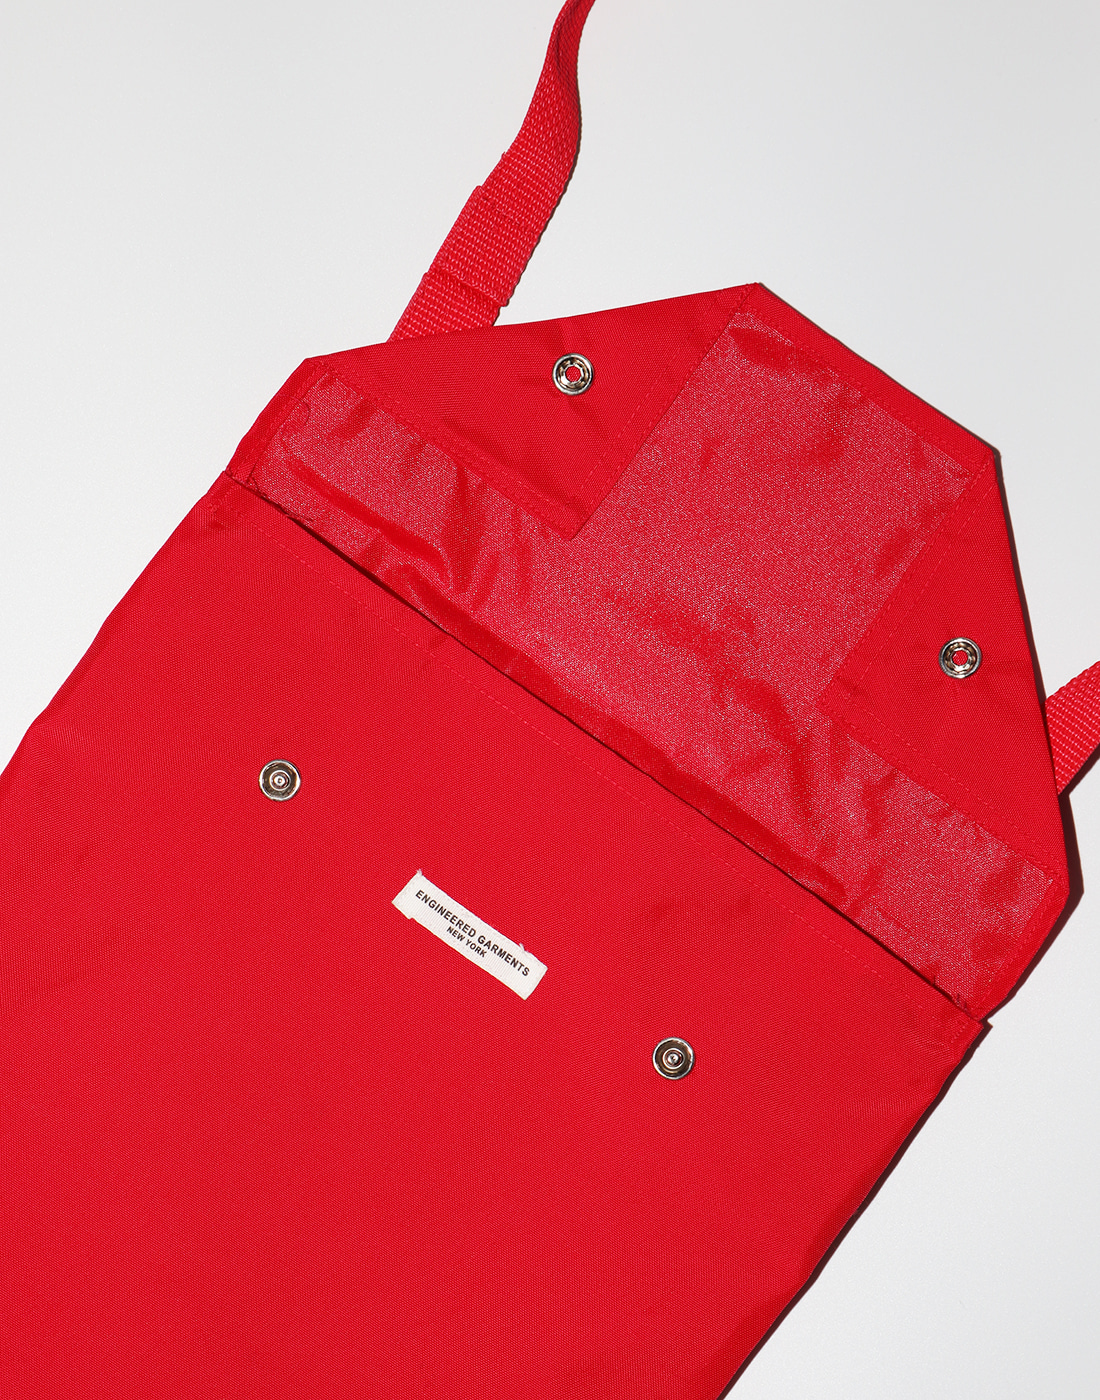 ENGINEERED GARMENTS Shoulder Pouch Bag, Red